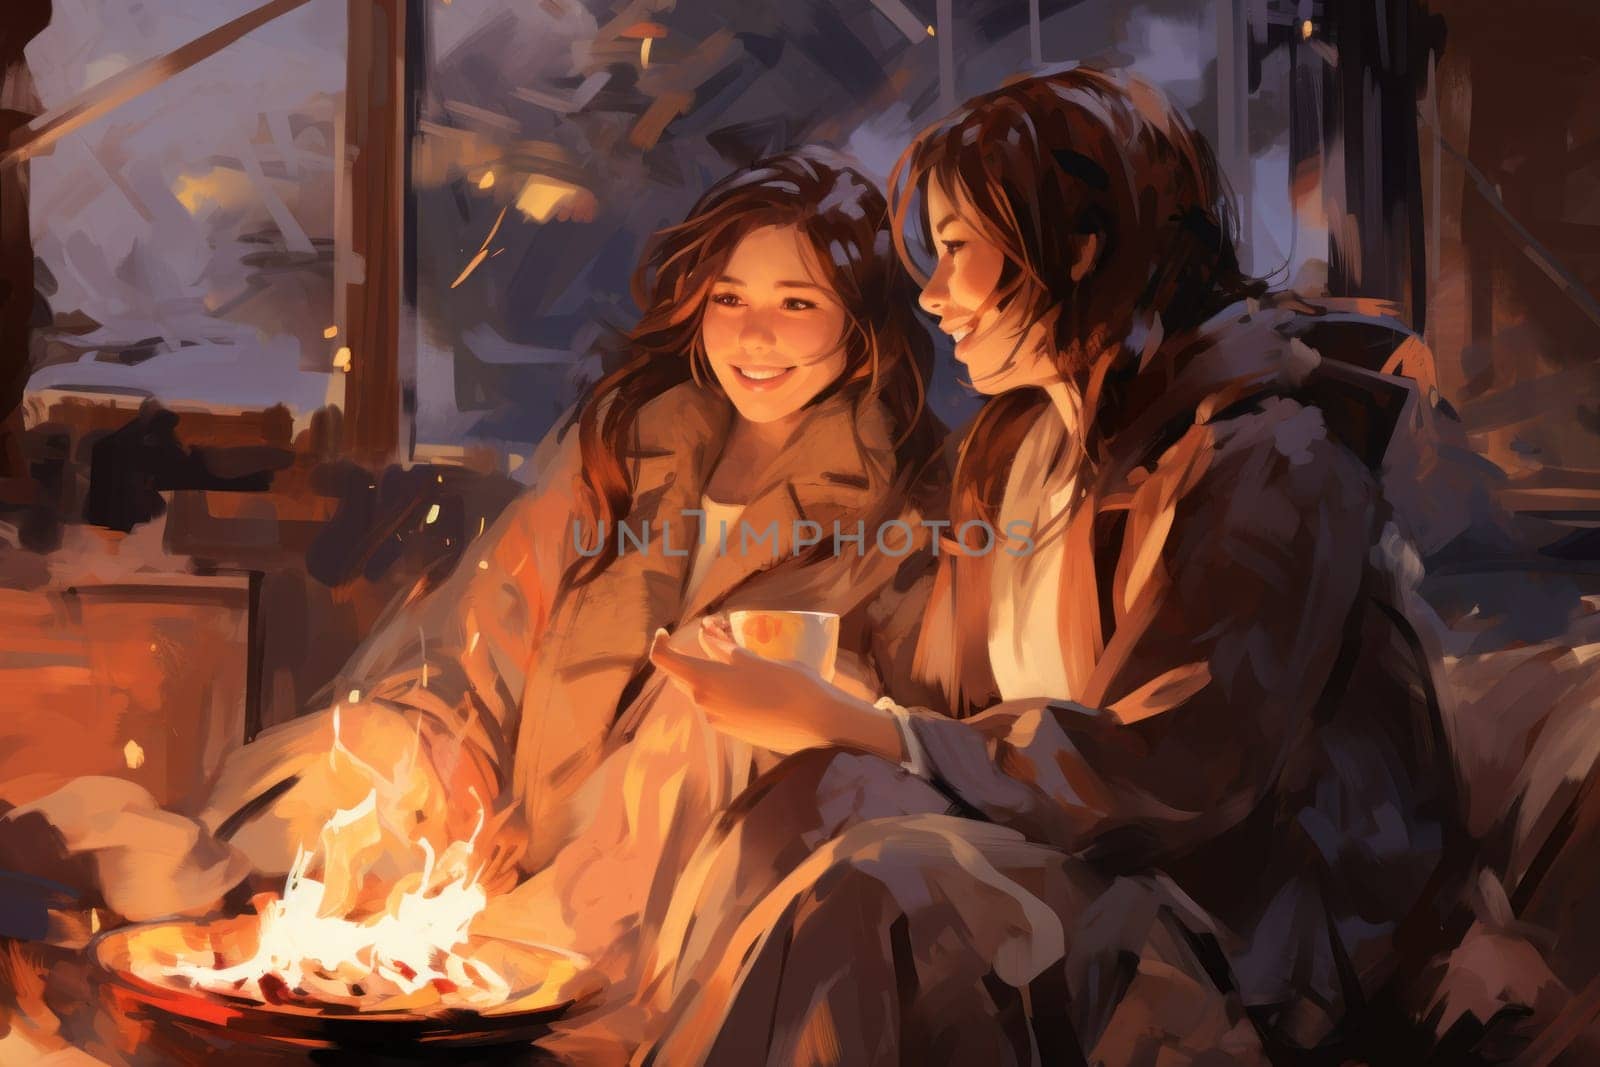 A heartwarming depiction of the winter season's charm, with individuals captured indoors, basking by a crackling fire, indulging in hot cocoa, or cocooned in soft blankets.